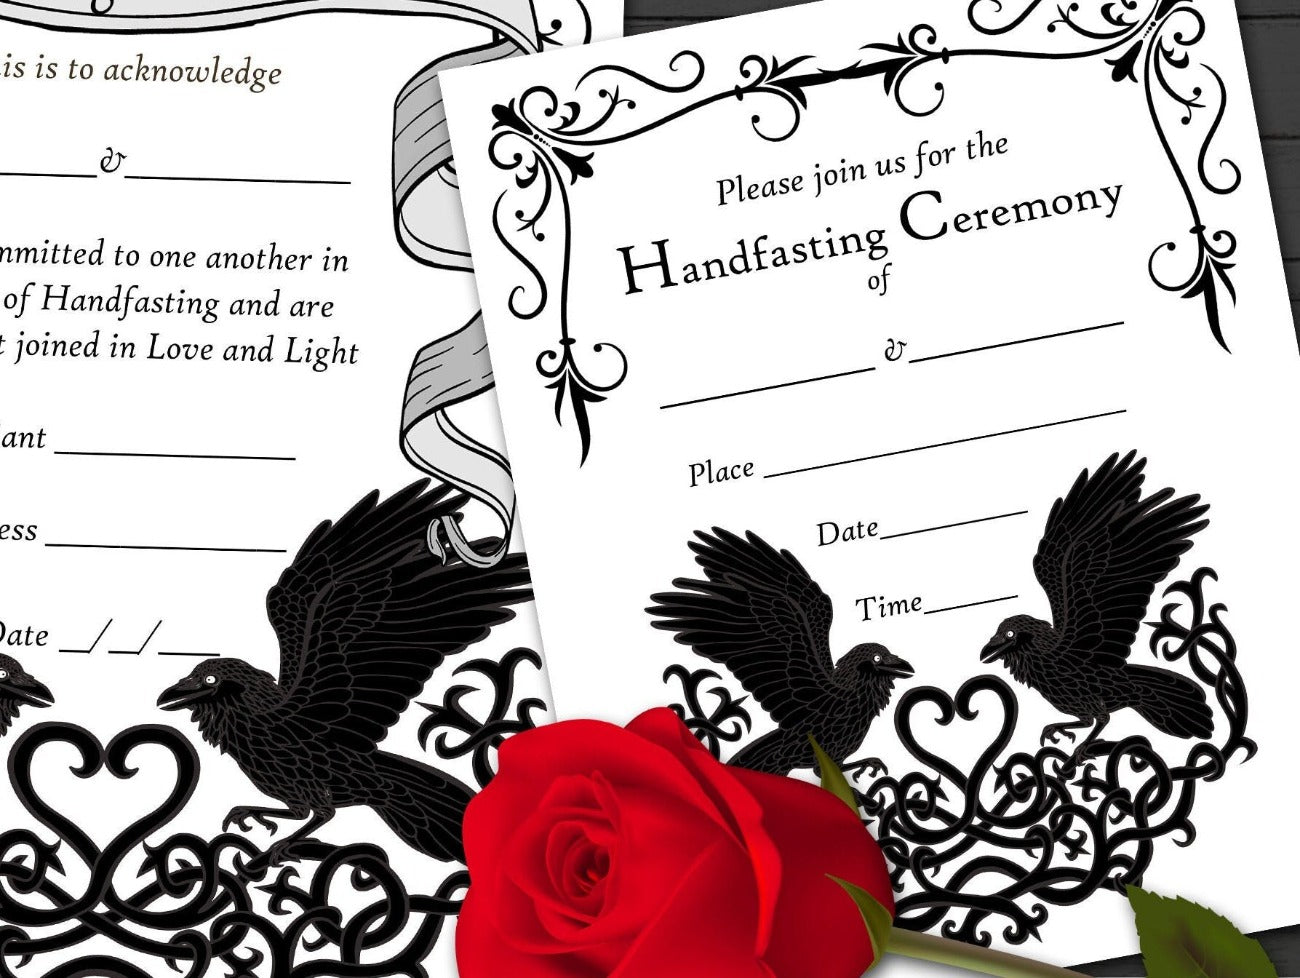 HANDFASTING CERTIFICATE & INVITATION, Printable Raven Love, Wicca Pagan Wedding Ceremony Certificate, Marriage Parchment, Cords and Vows